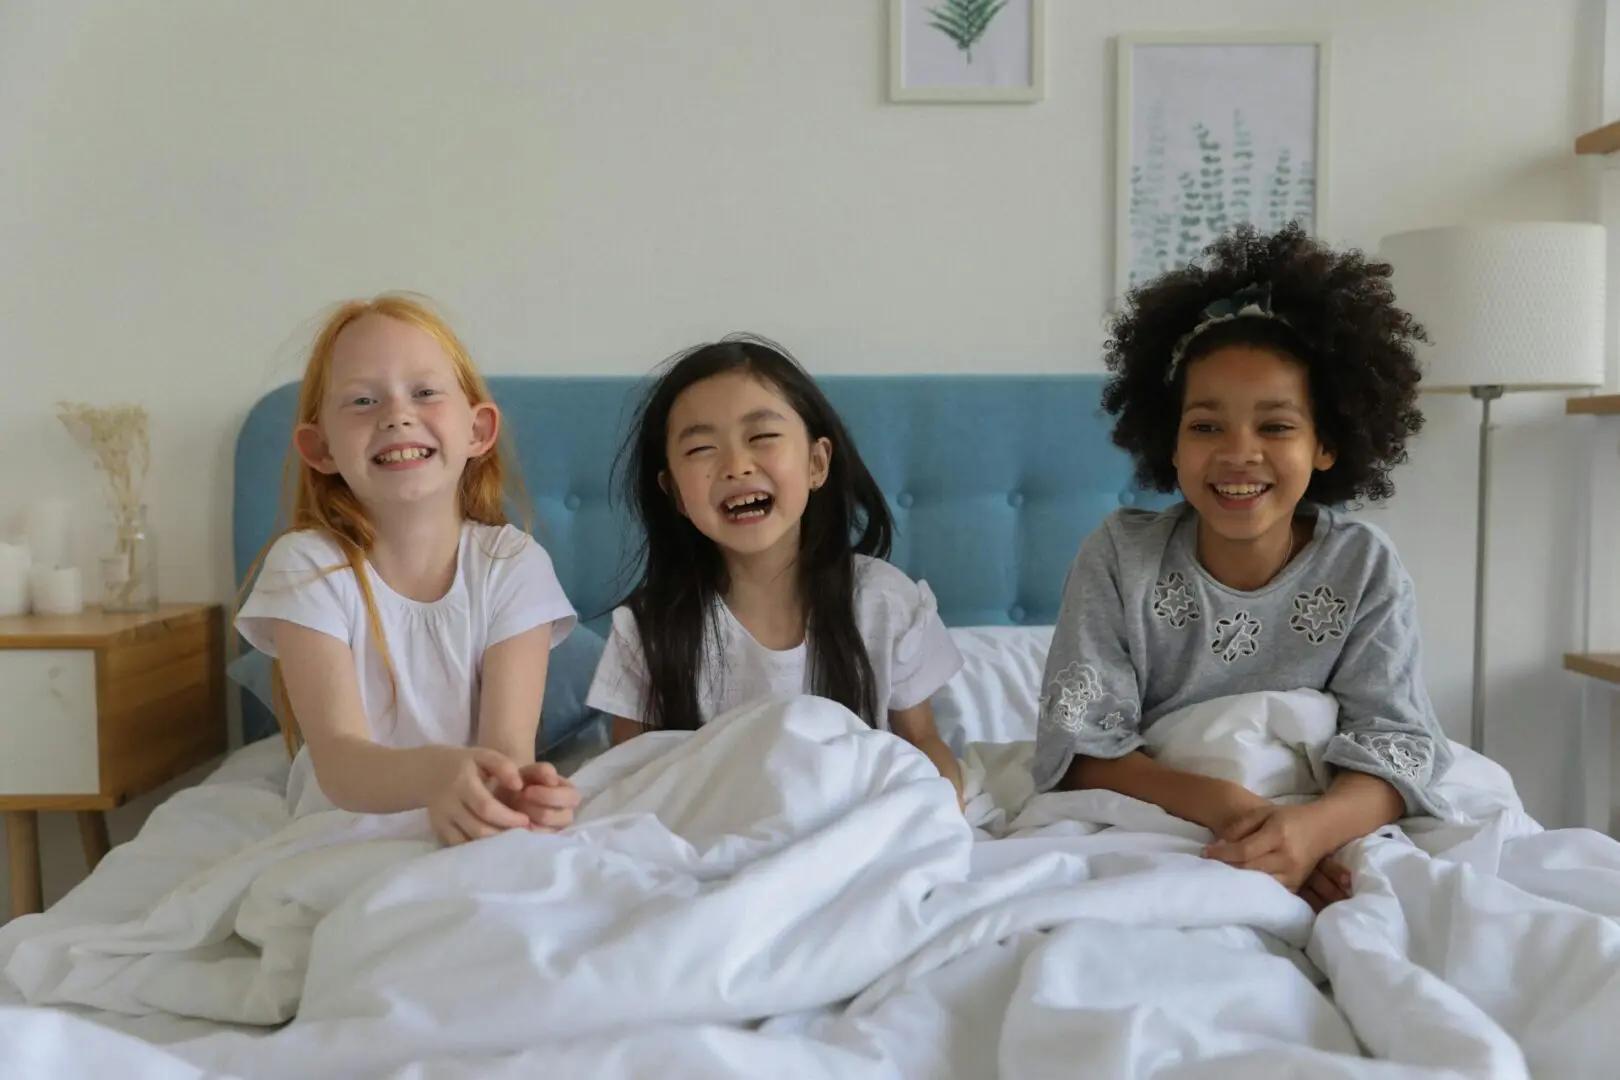 Three girls are sitting on a bed and smiling.